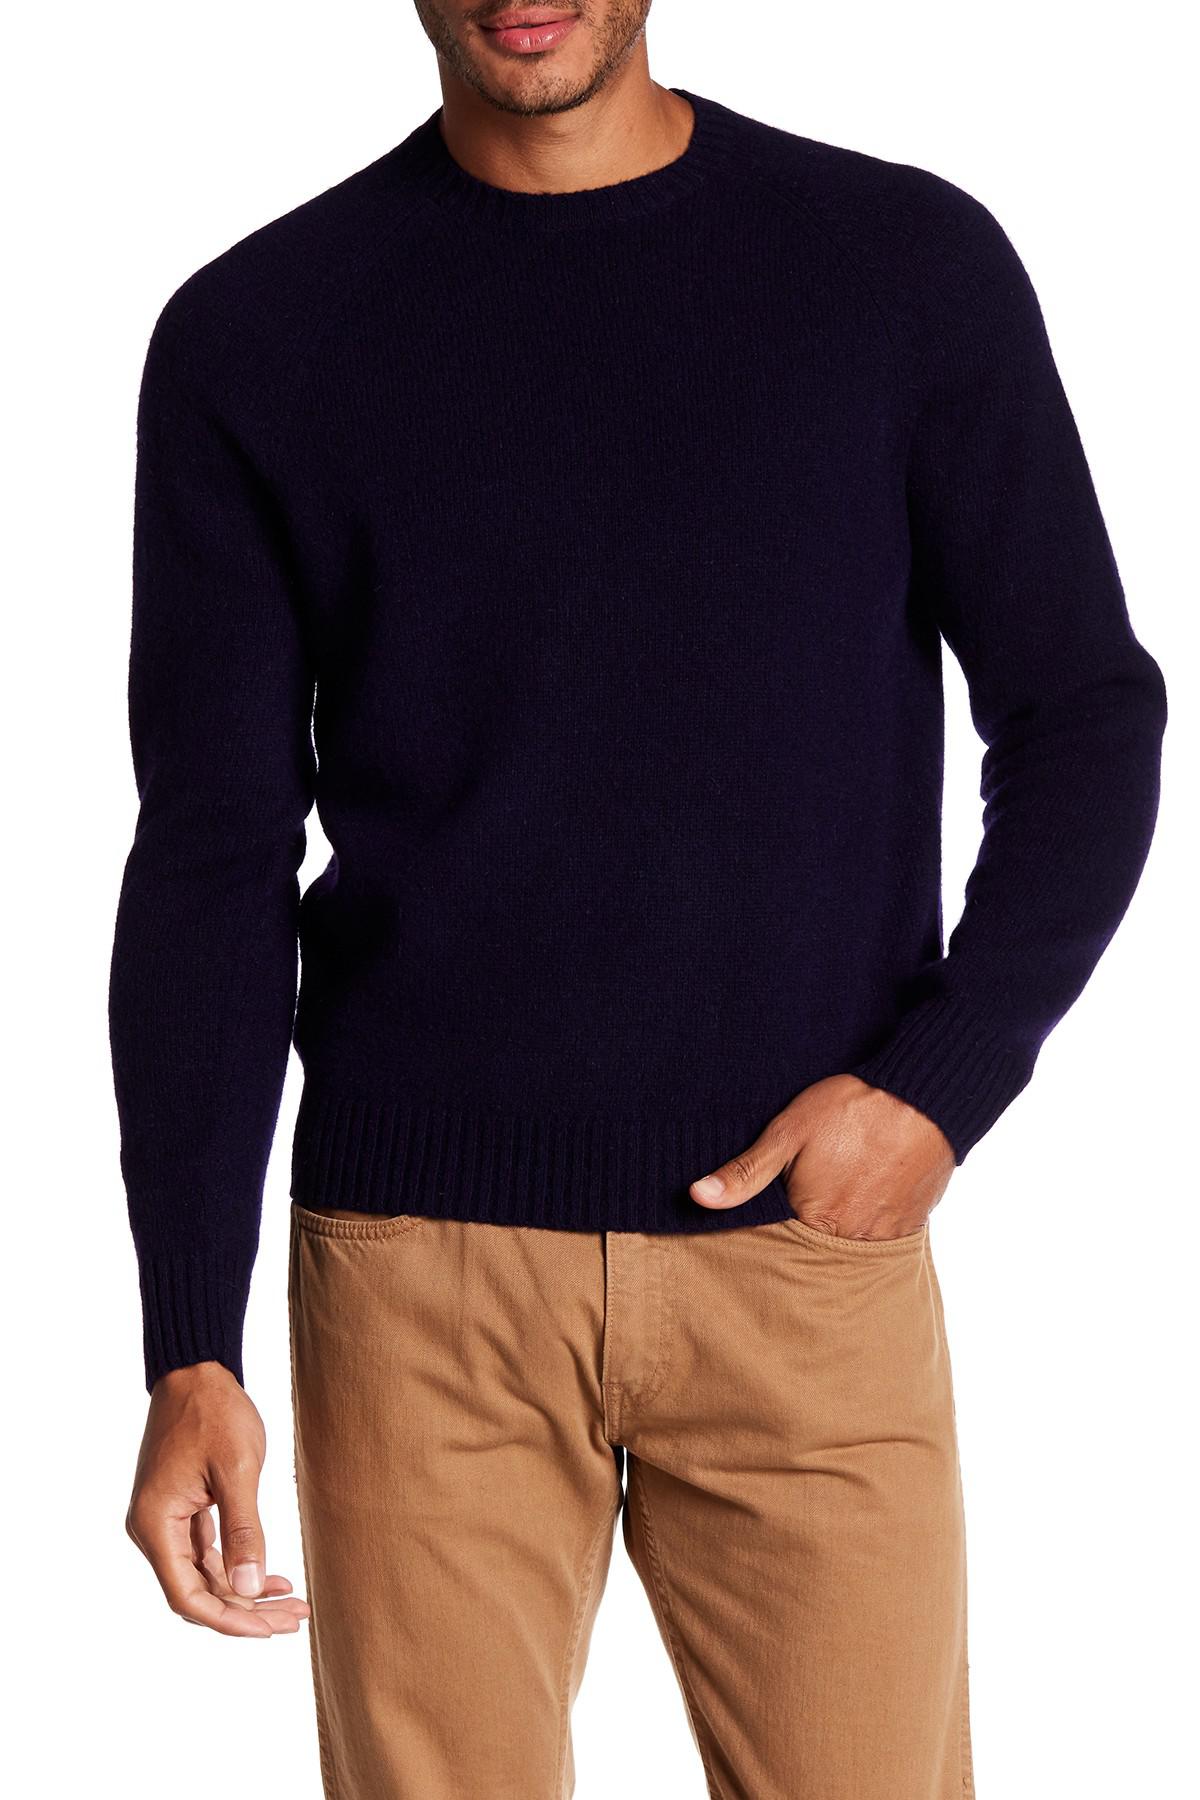 Lyst - Brooks Brothers Shetland Wool Sweater in Blue for Men